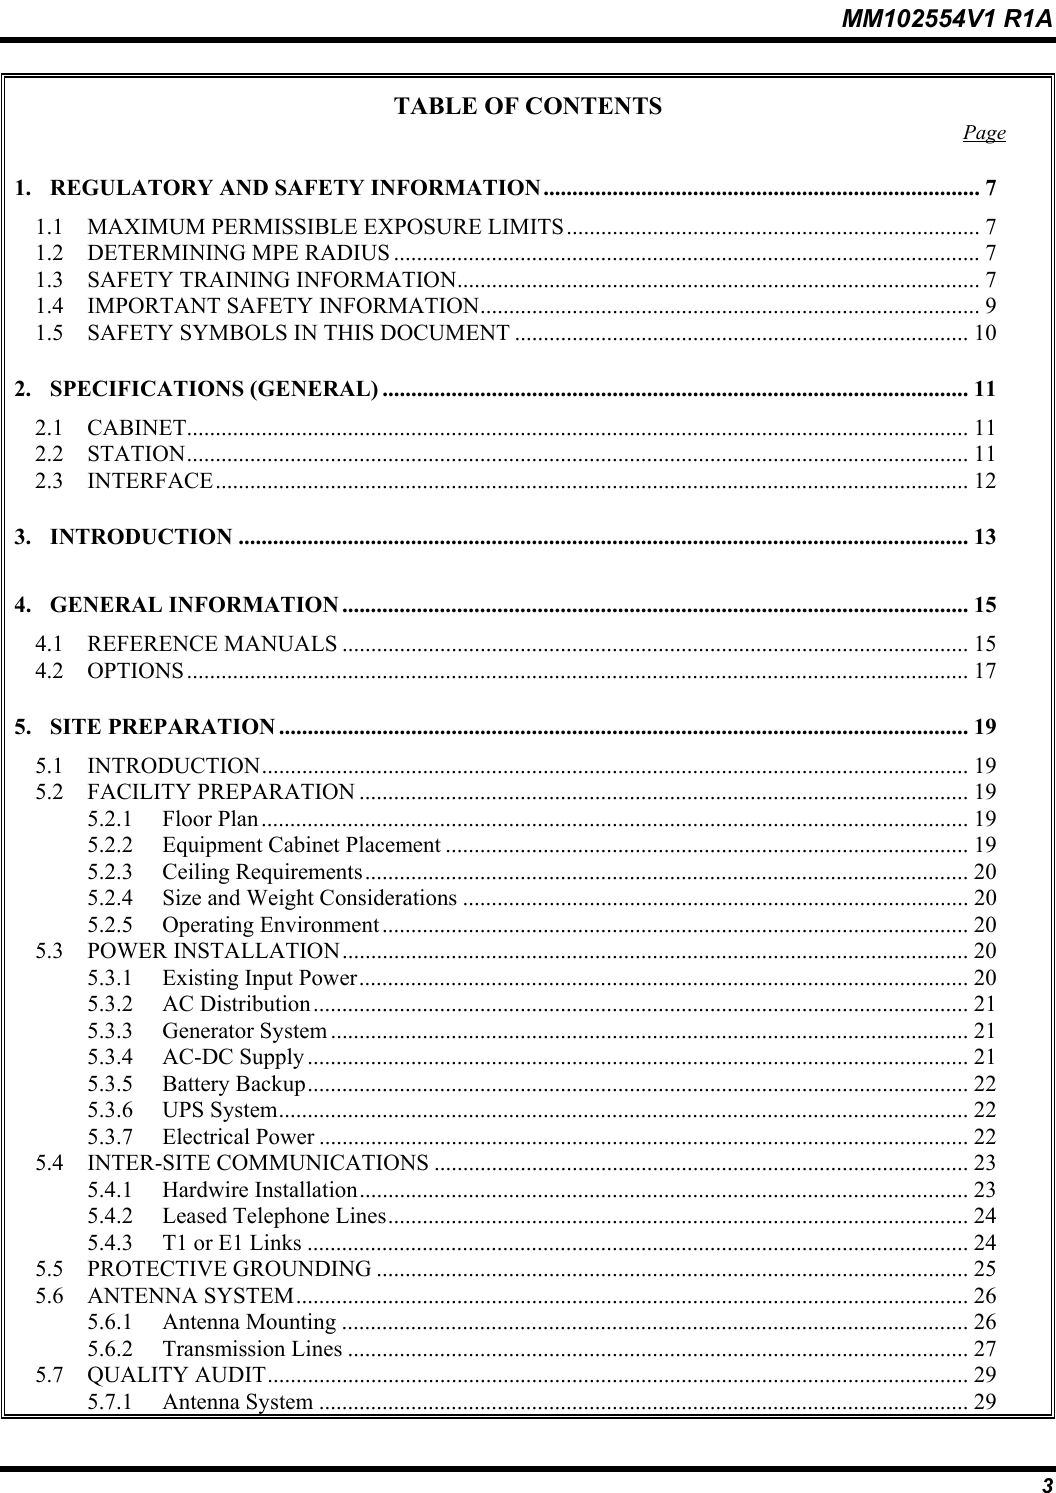 MM102554V1 R1A  3 TABLE OF CONTENTS  Page 1. REGULATORY AND SAFETY INFORMATION............................................................................ 7 1.1  MAXIMUM PERMISSIBLE EXPOSURE LIMITS........................................................................ 7 1.2 DETERMINING MPE RADIUS ......................................................................................................7 1.3  SAFETY TRAINING INFORMATION........................................................................................... 7 1.4  IMPORTANT SAFETY INFORMATION....................................................................................... 9 1.5  SAFETY SYMBOLS IN THIS DOCUMENT ............................................................................... 10 2. SPECIFICATIONS (GENERAL) ...................................................................................................... 11 2.1 CABINET........................................................................................................................................ 11 2.2 STATION........................................................................................................................................ 11 2.3 INTERFACE................................................................................................................................... 12 3. INTRODUCTION ............................................................................................................................... 13 4. GENERAL INFORMATION ............................................................................................................. 15 4.1 REFERENCE MANUALS ............................................................................................................. 15 4.2 OPTIONS........................................................................................................................................ 17 5. SITE PREPARATION ........................................................................................................................ 19 5.1 INTRODUCTION........................................................................................................................... 19 5.2 FACILITY PREPARATION .......................................................................................................... 19 5.2.1 Floor Plan ........................................................................................................................... 19 5.2.2  Equipment Cabinet Placement ........................................................................................... 19 5.2.3 Ceiling Requirements......................................................................................................... 20 5.2.4  Size and Weight Considerations ........................................................................................ 20 5.2.5 Operating Environment...................................................................................................... 20 5.3 POWER INSTALLATION............................................................................................................. 20 5.3.1  Existing Input Power.......................................................................................................... 20 5.3.2 AC Distribution.................................................................................................................. 21 5.3.3 Generator System ............................................................................................................... 21 5.3.4 AC-DC Supply ................................................................................................................... 21 5.3.5 Battery Backup................................................................................................................... 22 5.3.6 UPS System........................................................................................................................ 22 5.3.7 Electrical Power ................................................................................................................. 22 5.4 INTER-SITE COMMUNICATIONS ............................................................................................. 23 5.4.1 Hardwire Installation.......................................................................................................... 23 5.4.2  Leased Telephone Lines..................................................................................................... 24 5.4.3  T1 or E1 Links ................................................................................................................... 24 5.5 PROTECTIVE GROUNDING ....................................................................................................... 25 5.6 ANTENNA SYSTEM..................................................................................................................... 26 5.6.1 Antenna Mounting ............................................................................................................. 26 5.6.2 Transmission Lines ............................................................................................................ 27 5.7 QUALITY AUDIT.......................................................................................................................... 29 5.7.1 Antenna System ................................................................................................................. 29 